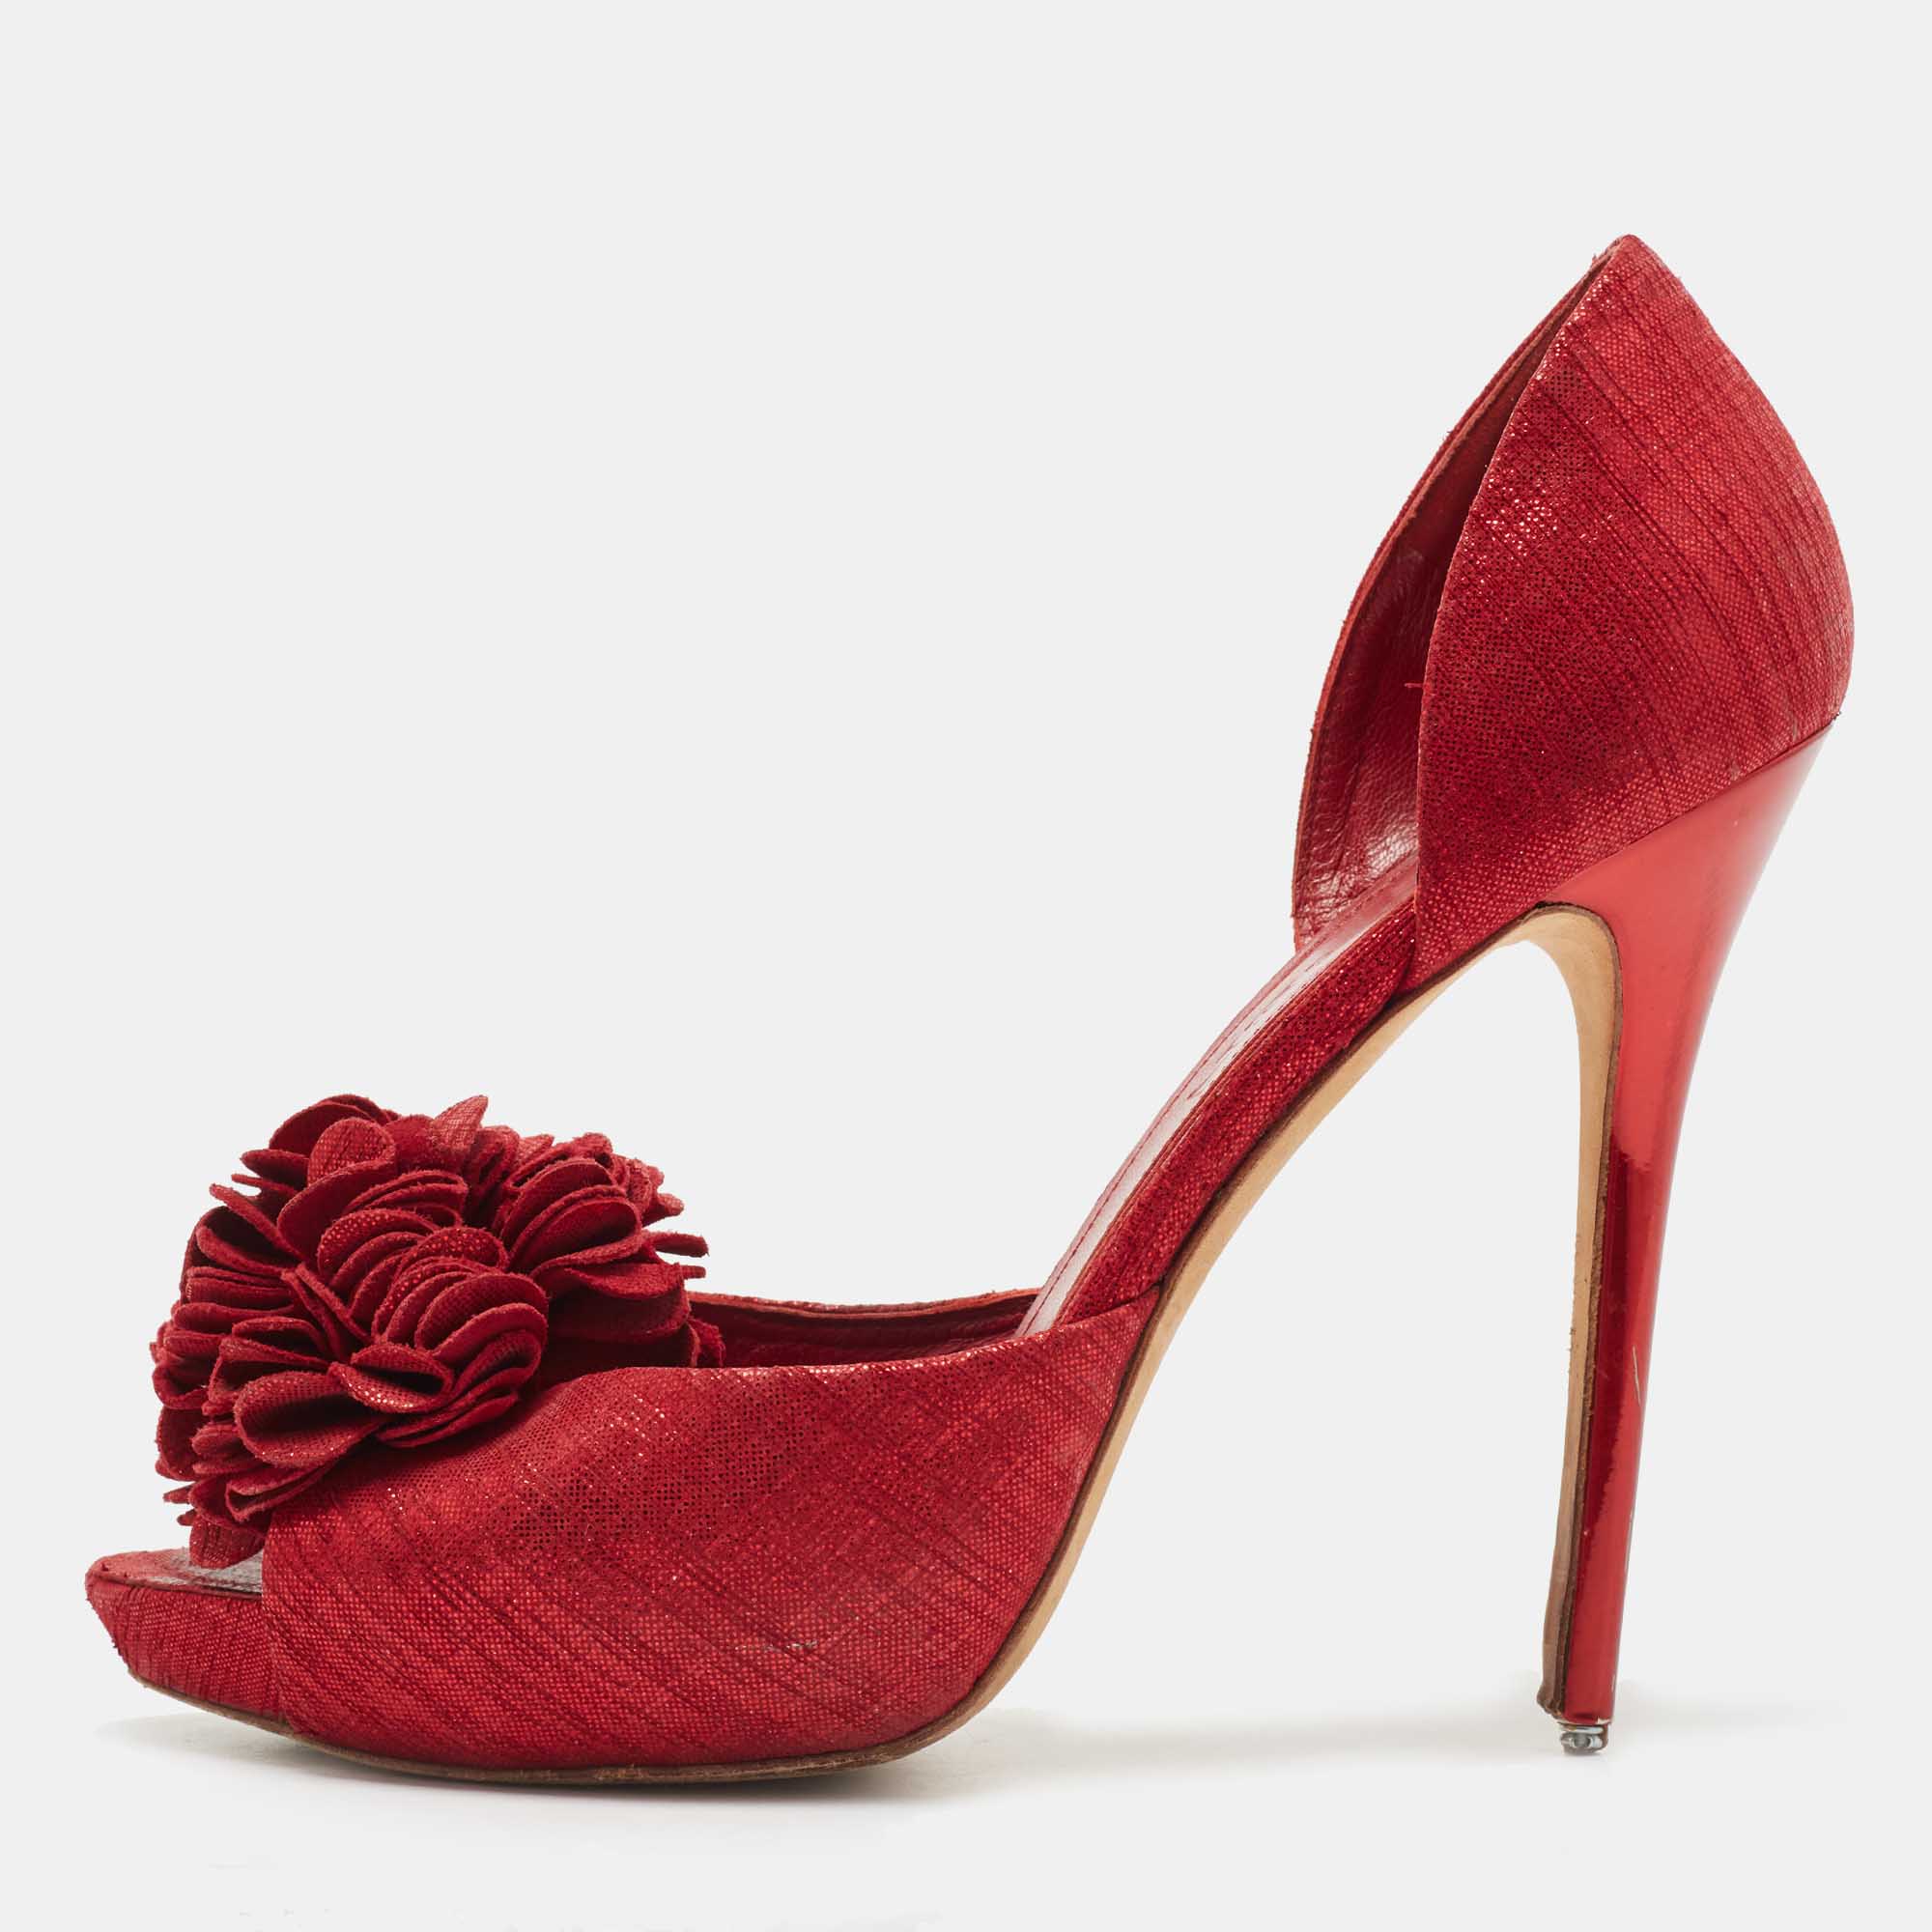 Pre-owned Alexander Mcqueen Red Laminated Suede Floral Applique D'orsay Pumps Size 38.5